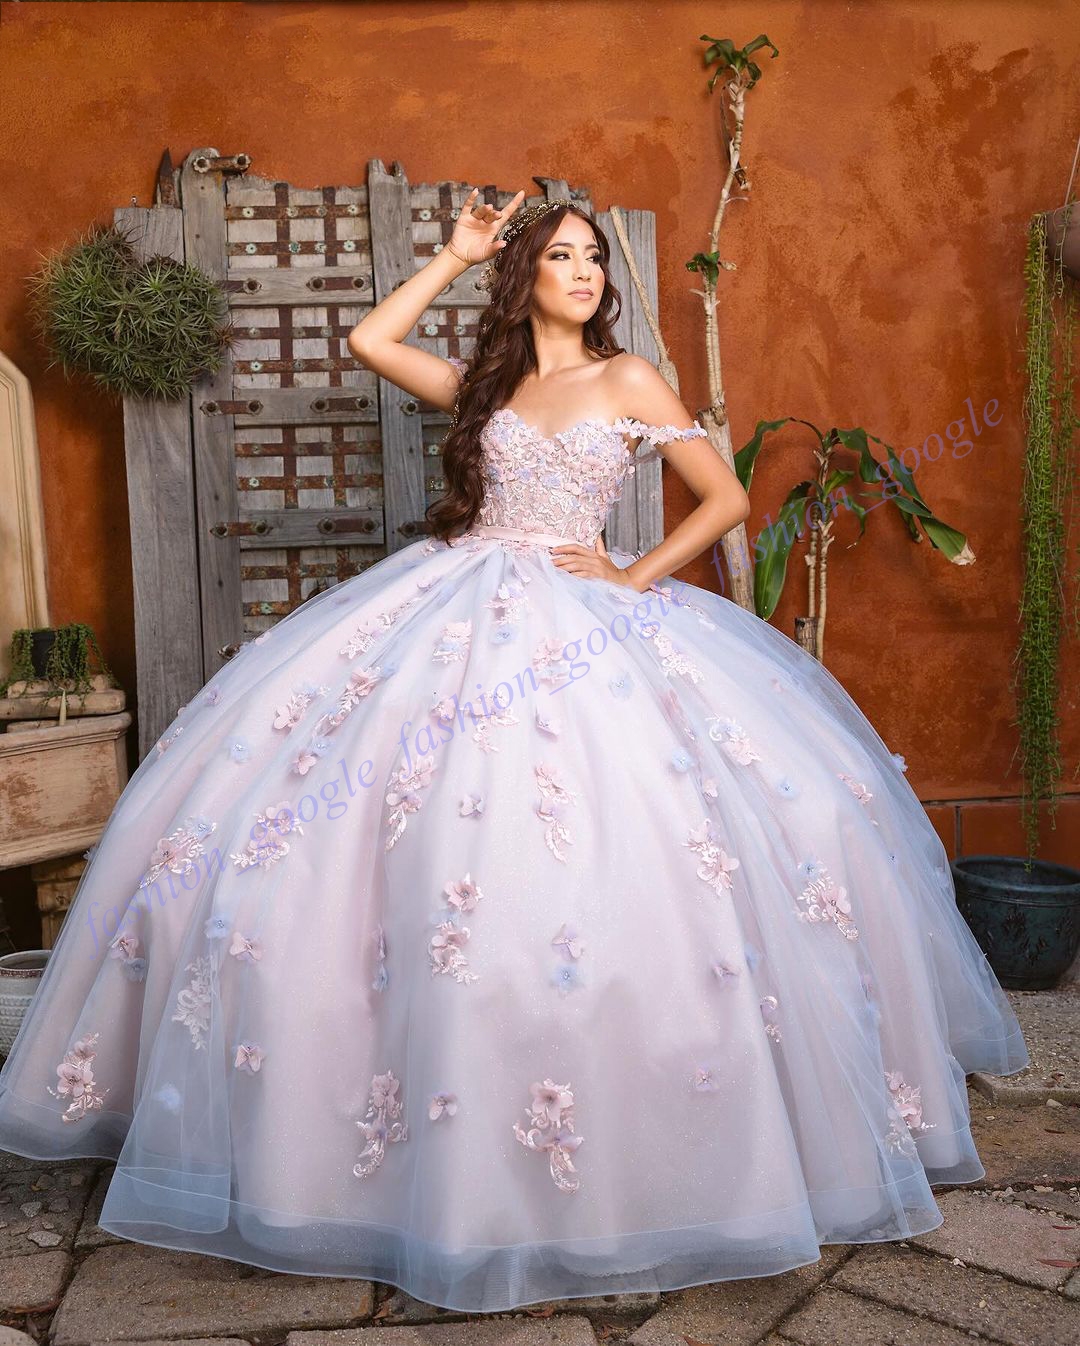 Fairytale Princess Quinceanera Dress 2024 3D Floral Contraving Colors Charro Mexican Quince Sweet 15/16 Birthday Party Virt for 15th Girl Drama Winter.